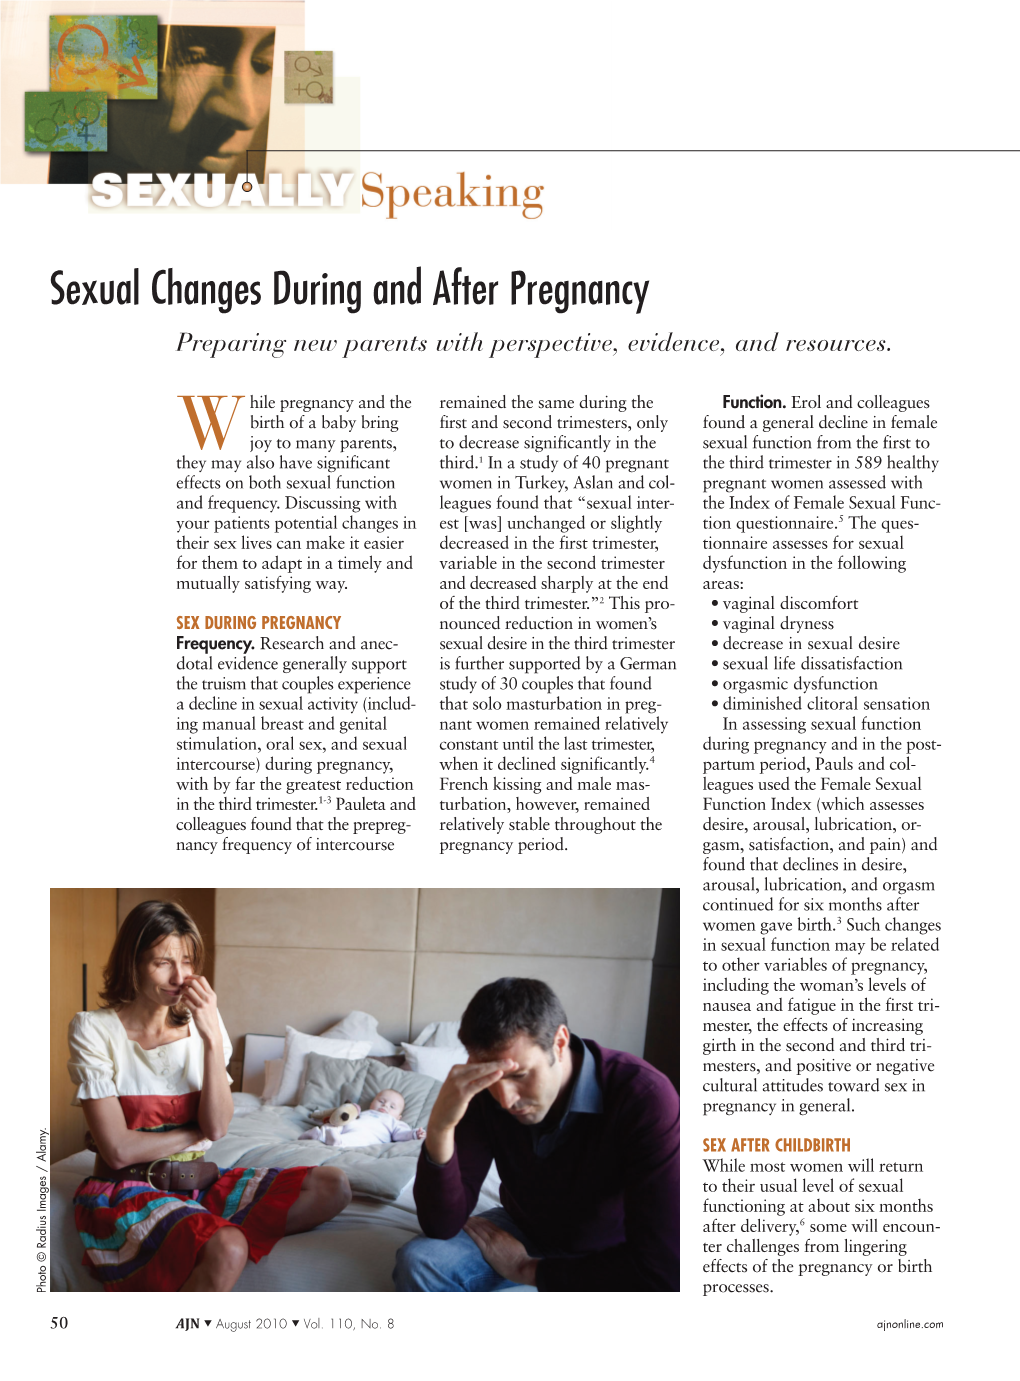 Sexual Changes During and After Pregnancy Preparing New Parents with Perspective, Evidence, and Resources